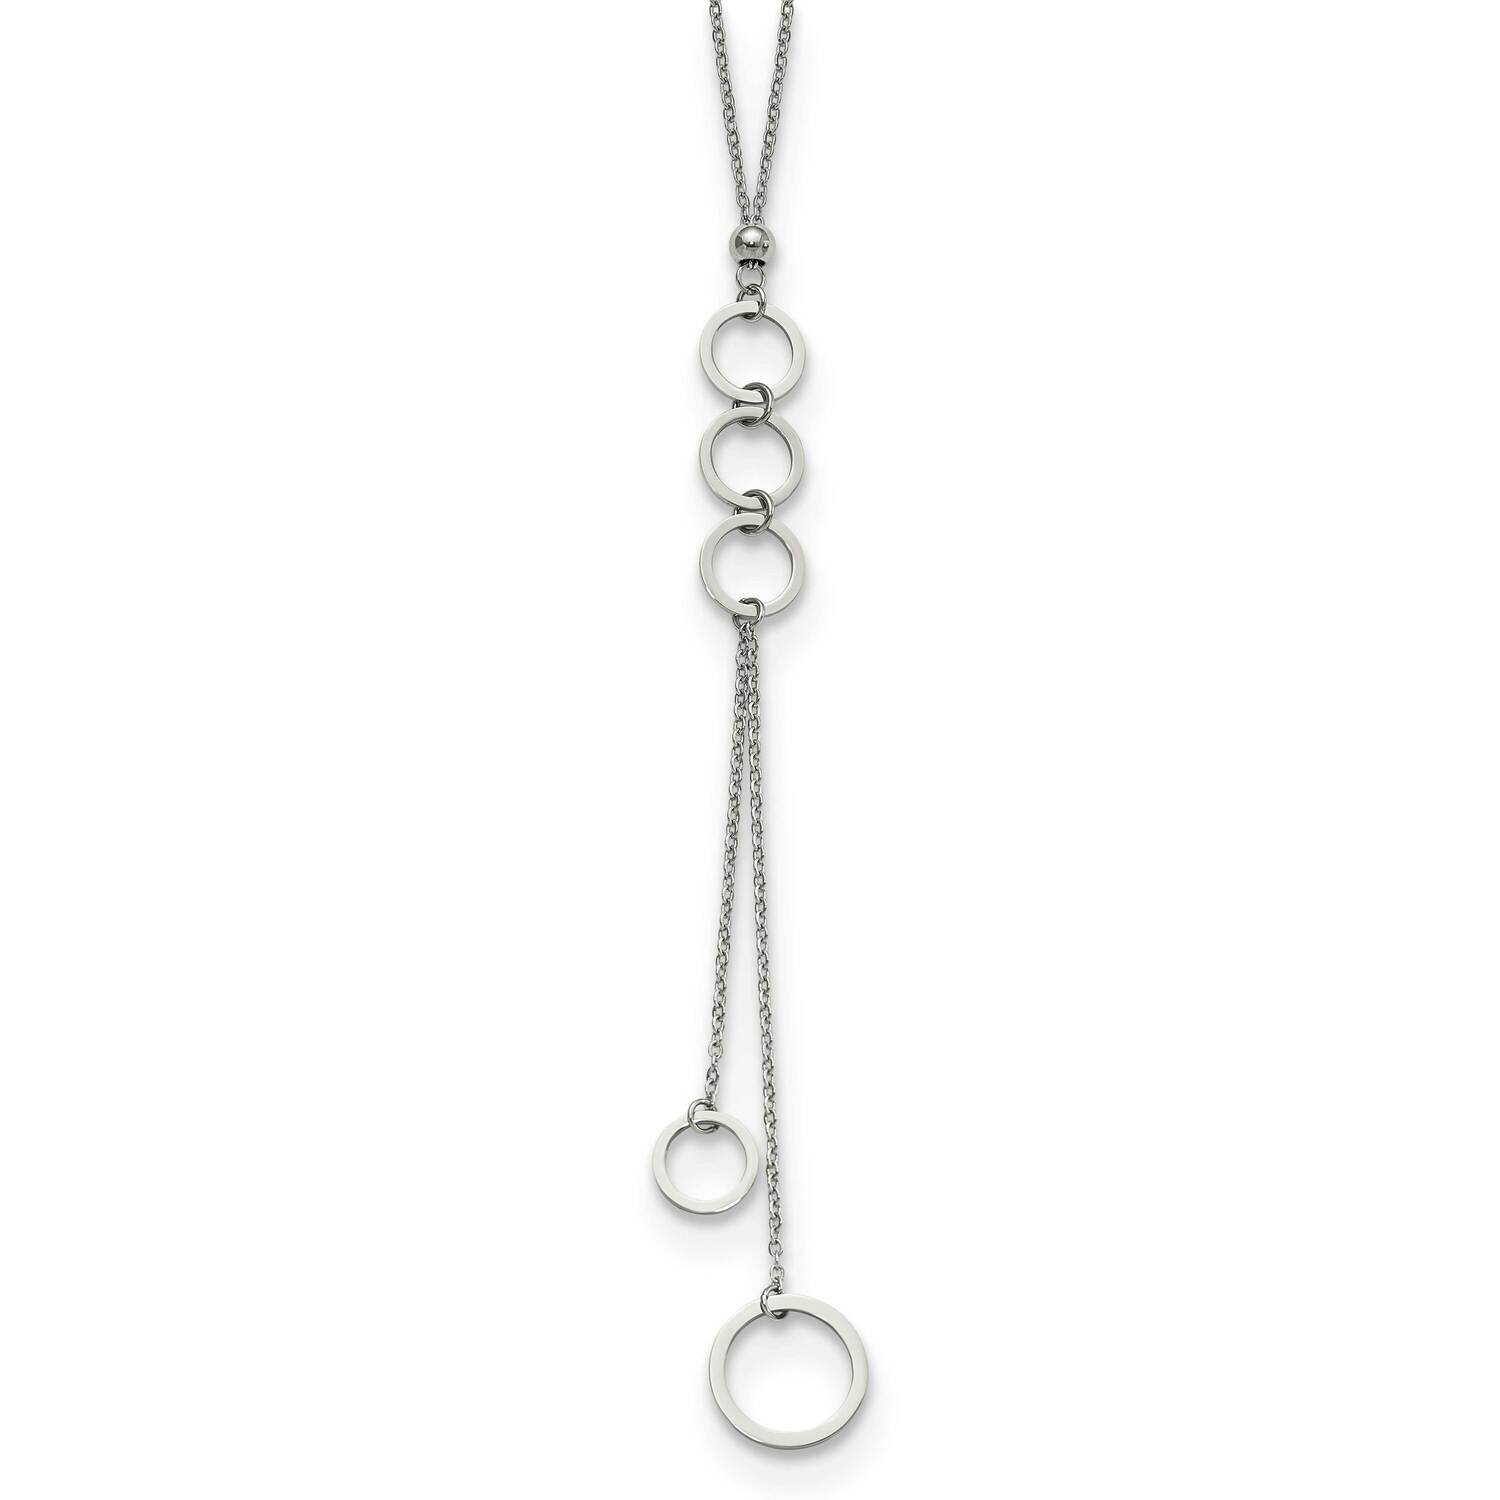 Circle Dangles 2 Inch Extension 23In Necklace Stainless Steel Polished SRN3017-23